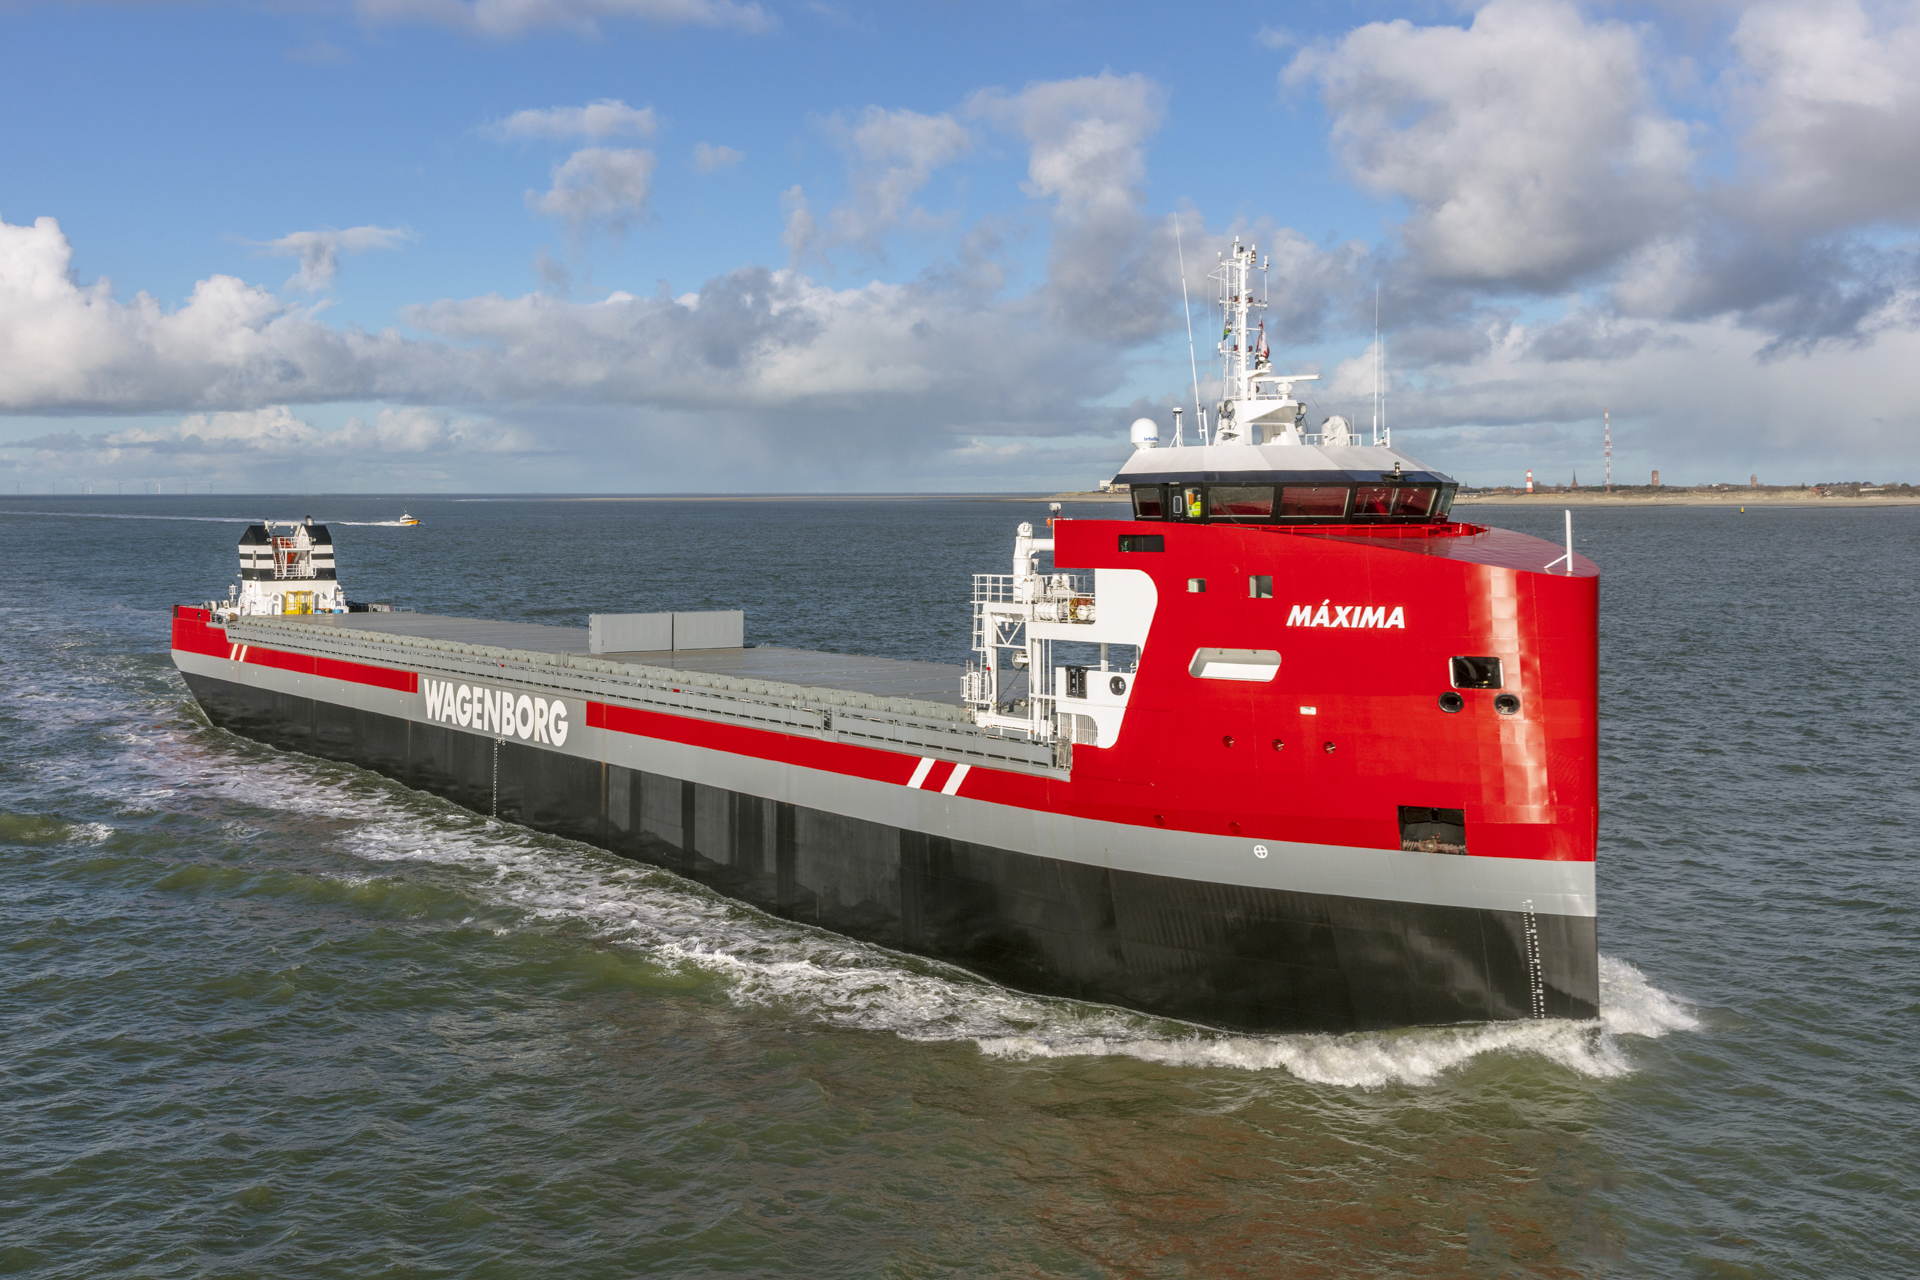 Wagenborg’s second EasyMax vessel enters into service